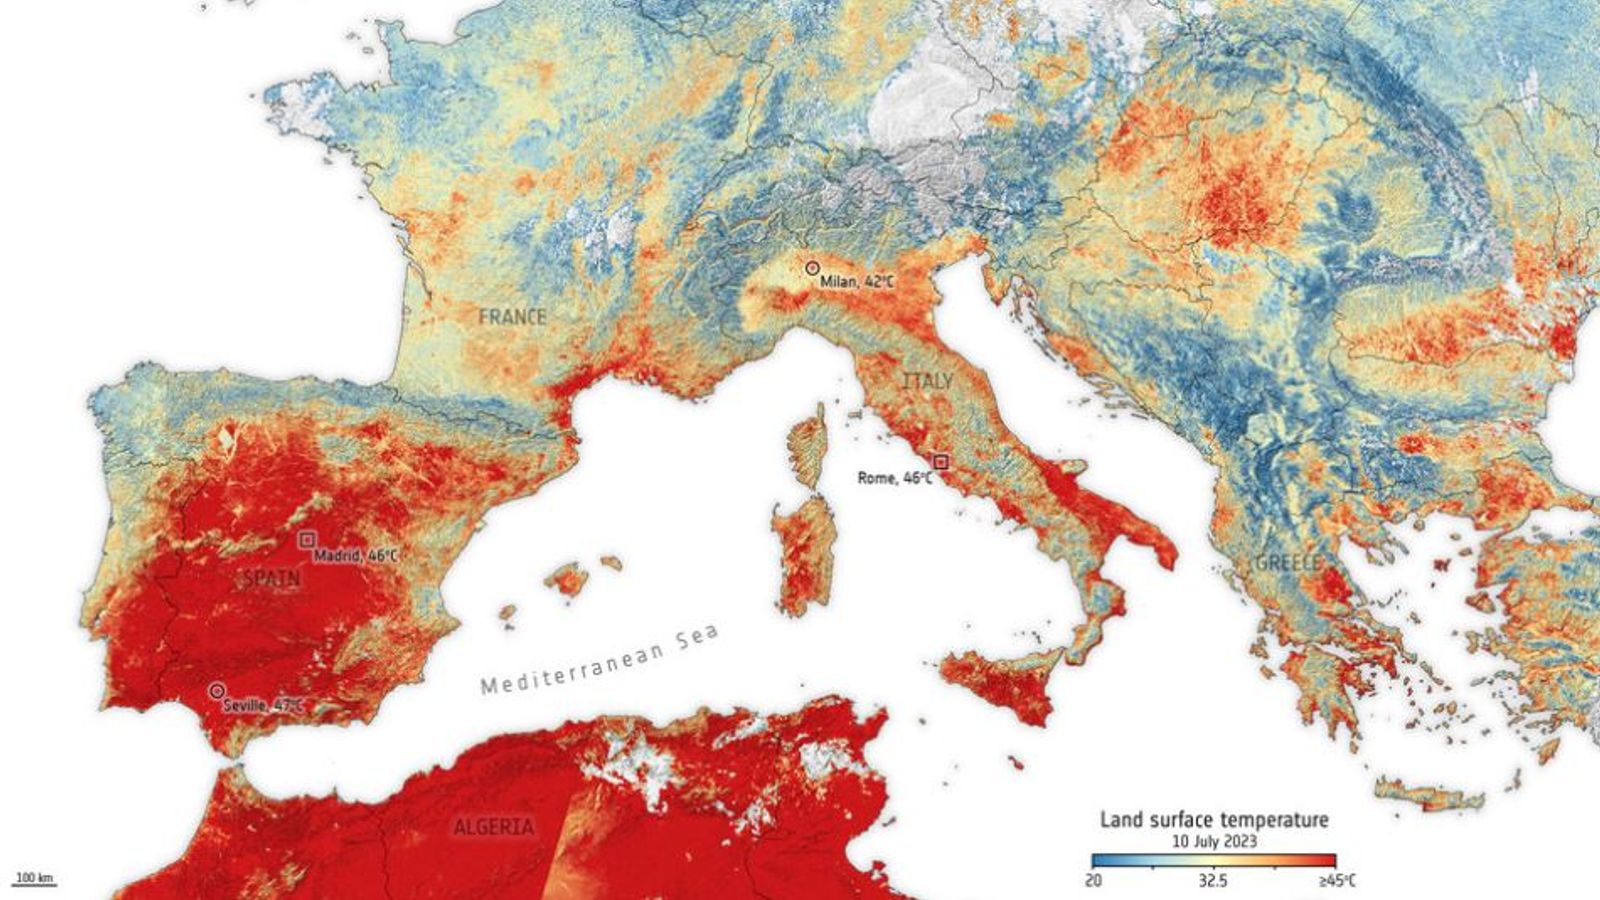 Cerberus heatwave: European data shows land temperatures are scorching - and it's about to get much worse